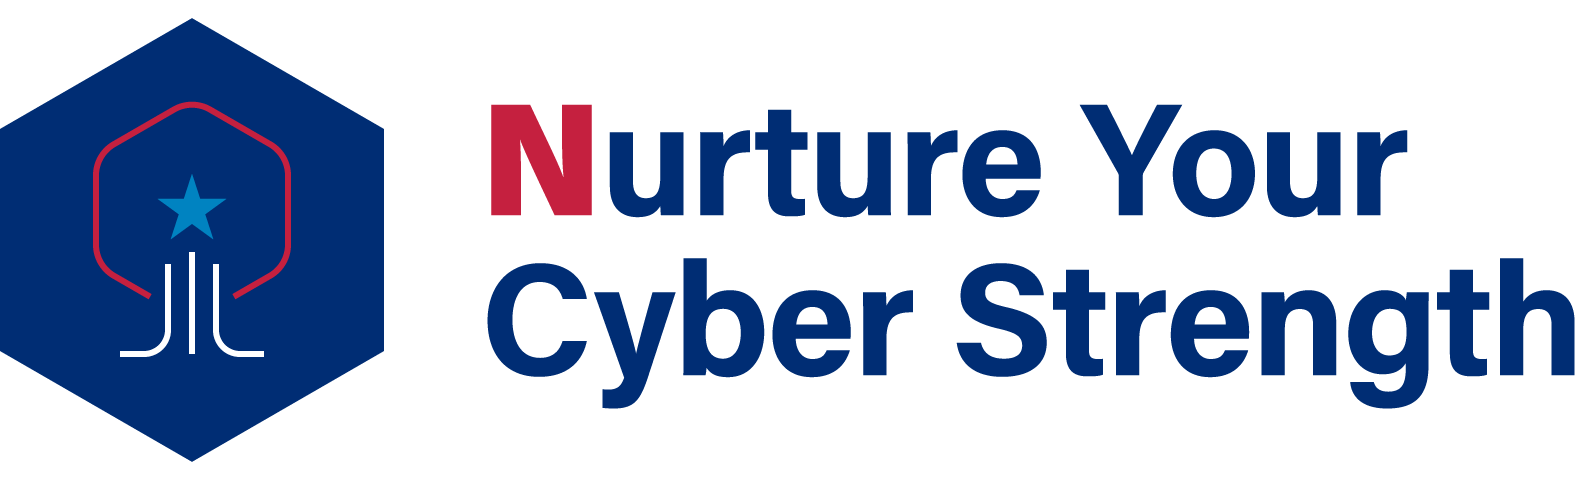 Nurture Your Cyber Strength Cyber Strong